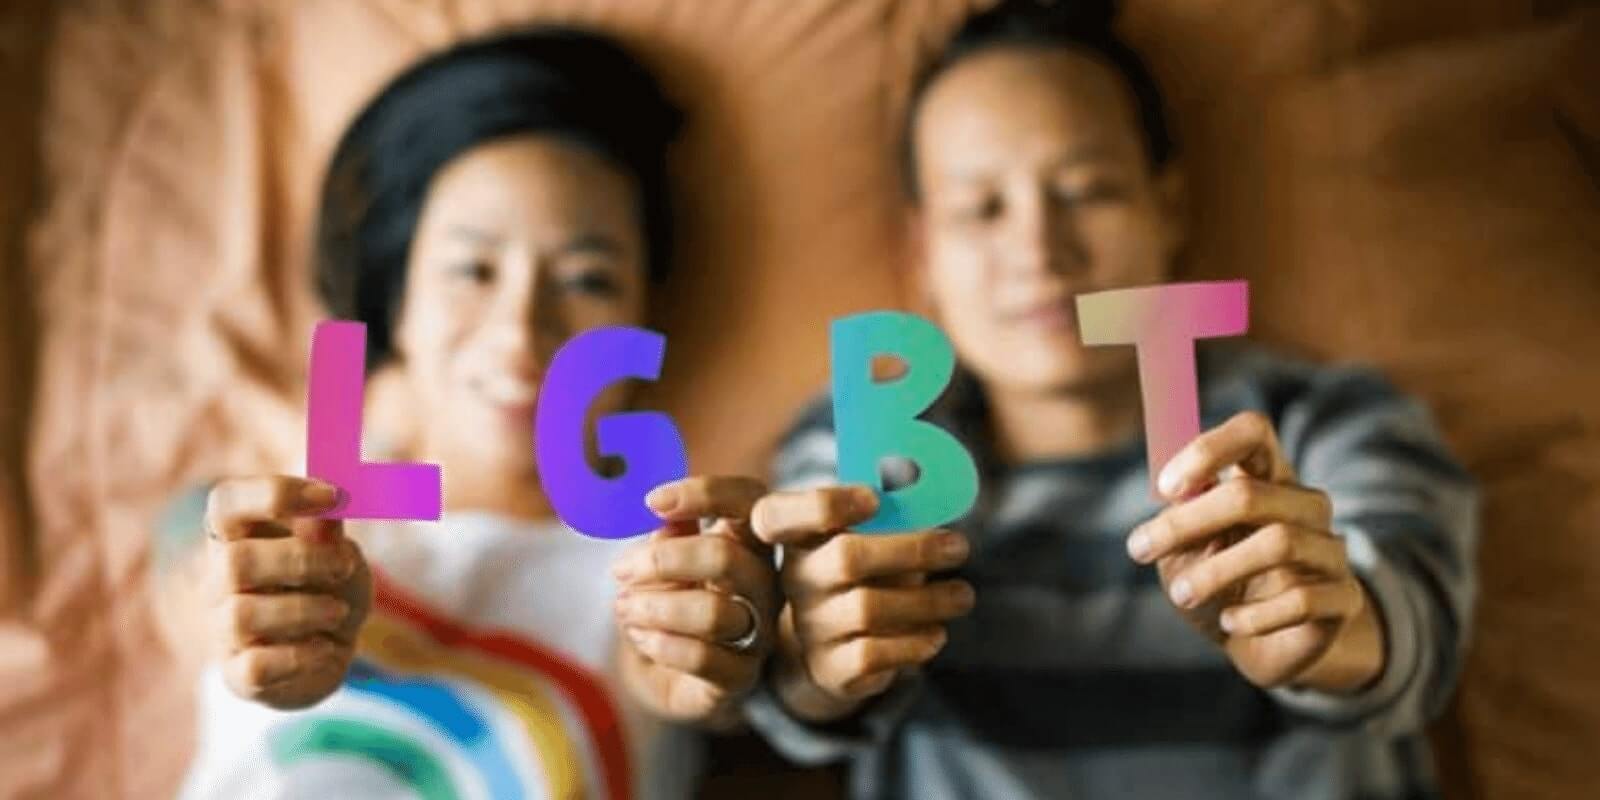 Two teens holding LGBT letters